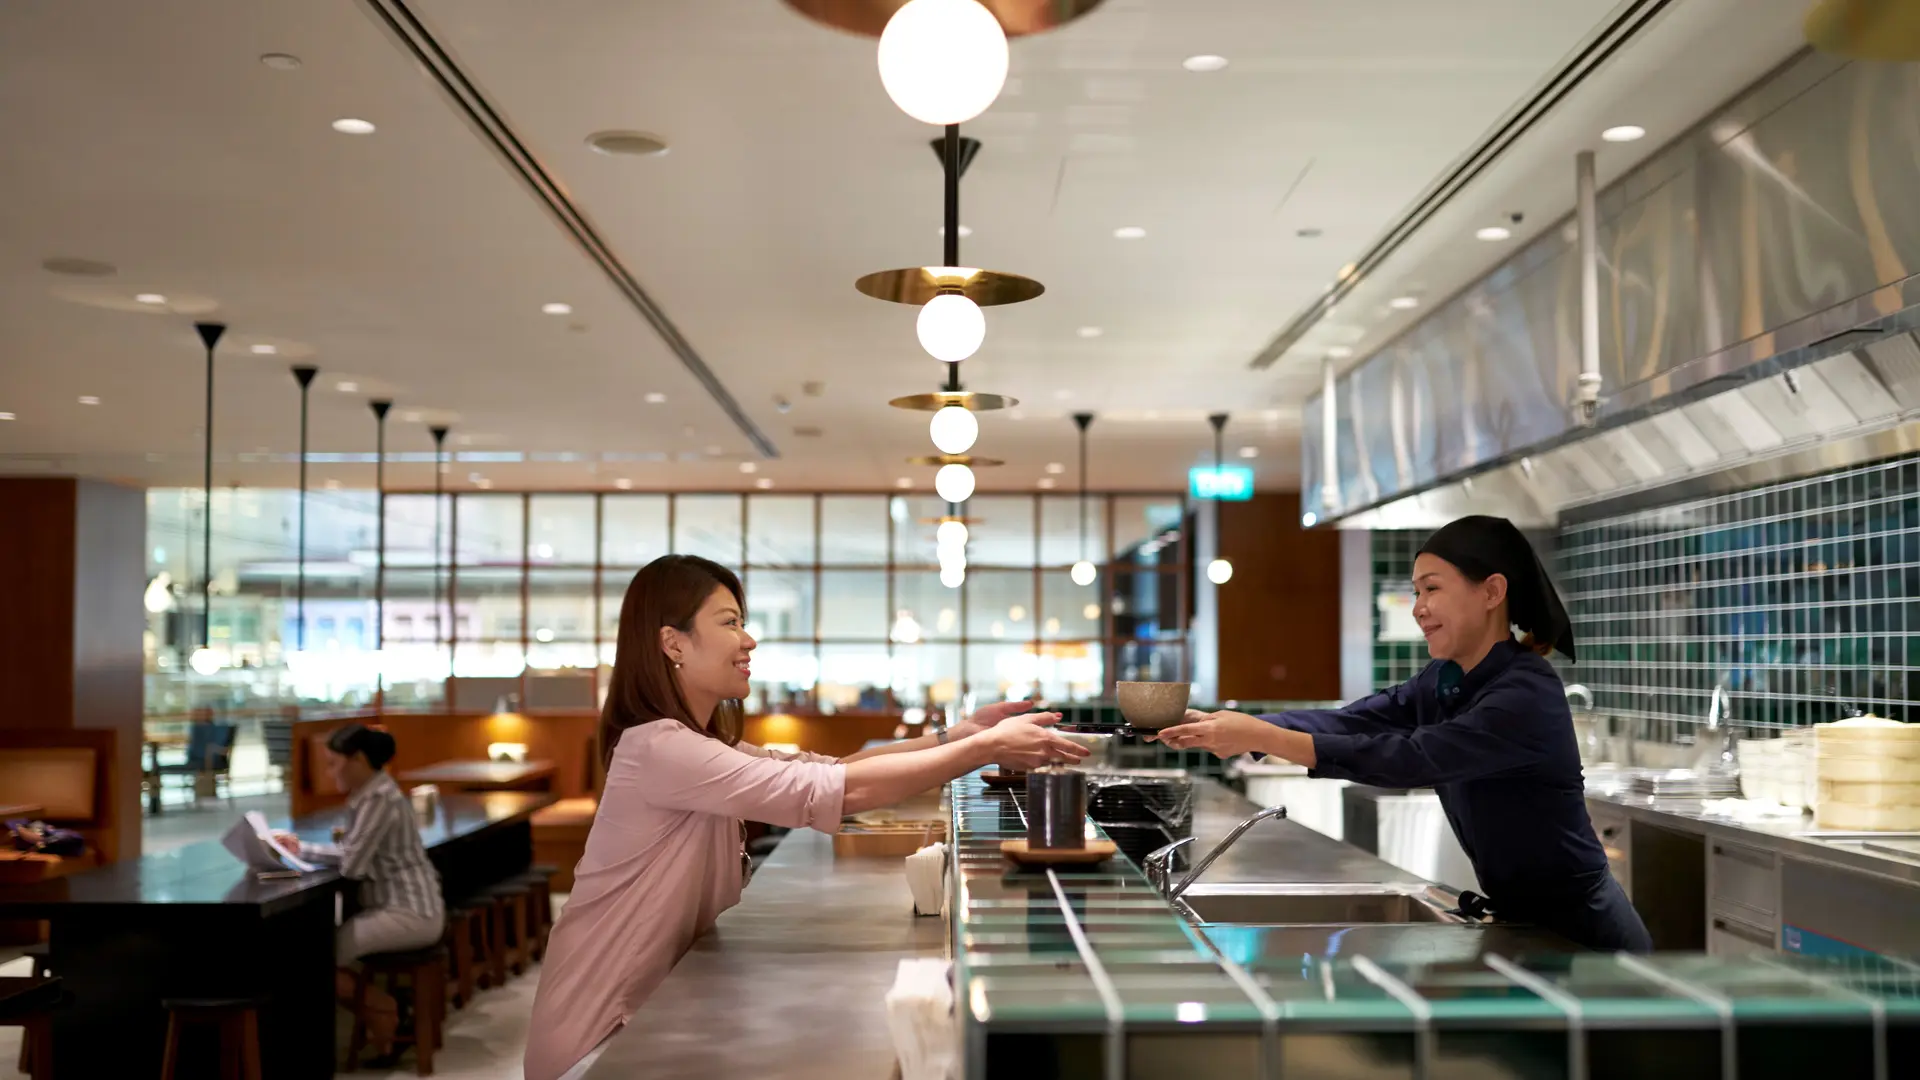 Airlines News - Cathay Pacific reopens lounges in Hong Kong, Singapore and Japan